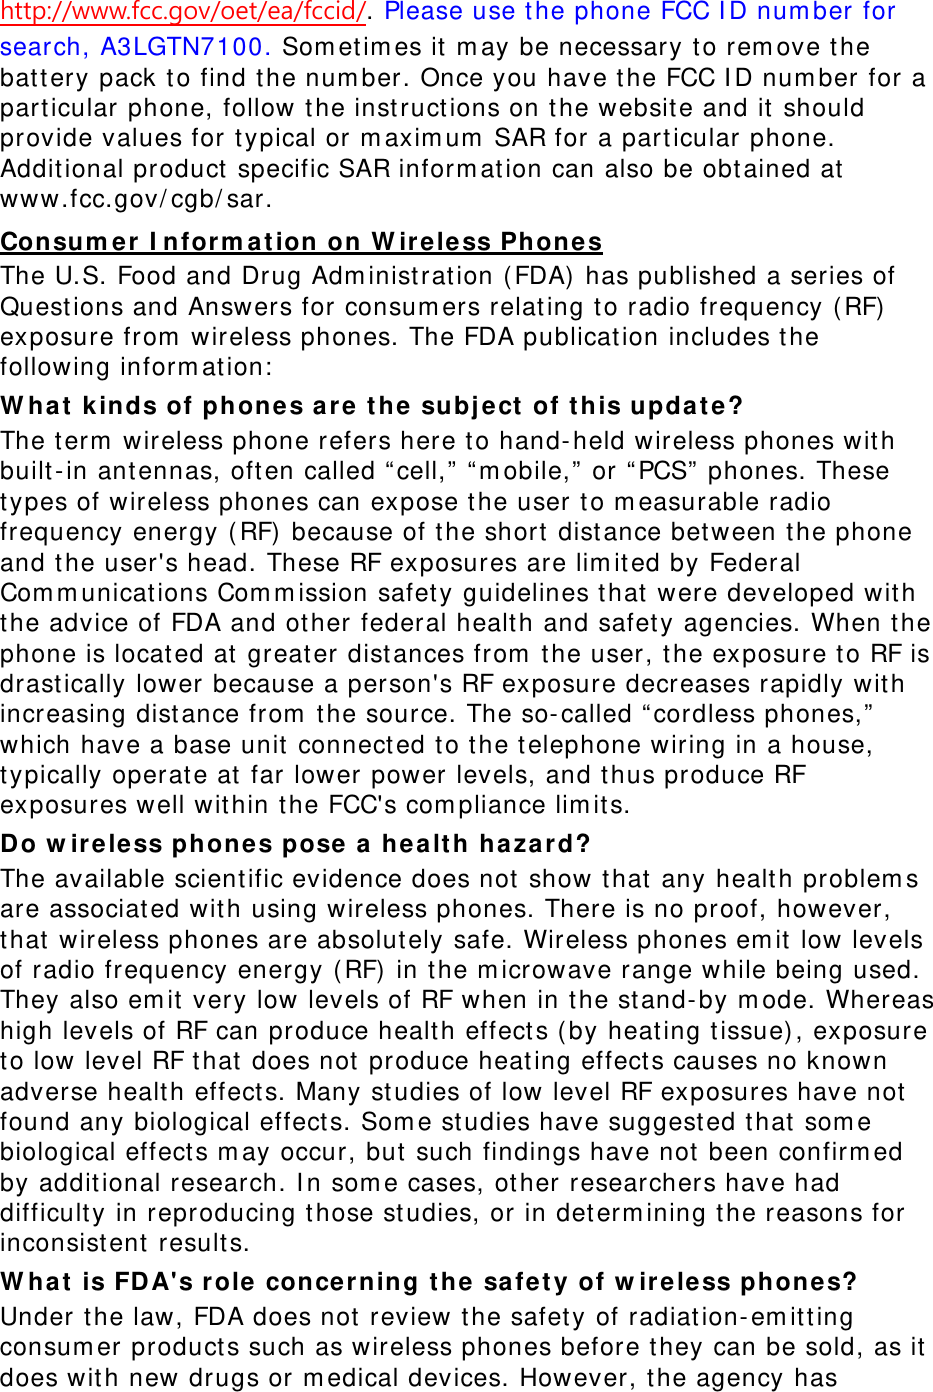 http://www.fcc.gov/oet/ea/fccid/. Please use the phone FCC ID number for search, A3LGTN7100. Sometimes it may be necessary to remove the battery pack to find the number. Once you have the FCC ID number for a particular phone, follow the instructions on the website and it should provide values for typical or maximum SAR for a particular phone. Additional product specific SAR information can also be obtained at www.fcc.gov/cgb/sar. Consumer Information on Wireless Phones The U.S. Food and Drug Administration (FDA) has published a series of Questions and Answers for consumers relating to radio frequency (RF) exposure from wireless phones. The FDA publication includes the following information: What kinds of phones are the subject of this update? The term wireless phone refers here to hand-held wireless phones with built-in antennas, often called “cell,” “mobile,” or “PCS” phones. These types of wireless phones can expose the user to measurable radio frequency energy (RF) because of the short distance between the phone and the user&apos;s head. These RF exposures are limited by Federal Communications Commission safety guidelines that were developed with the advice of FDA and other federal health and safety agencies. When the phone is located at greater distances from the user, the exposure to RF is drastically lower because a person&apos;s RF exposure decreases rapidly with increasing distance from the source. The so-called “cordless phones,” which have a base unit connected to the telephone wiring in a house, typically operate at far lower power levels, and thus produce RF exposures well within the FCC&apos;s compliance limits. Do wireless phones pose a health hazard? The available scientific evidence does not show that any health problems are associated with using wireless phones. There is no proof, however, that wireless phones are absolutely safe. Wireless phones emit low levels of radio frequency energy (RF) in the microwave range while being used. They also emit very low levels of RF when in the stand-by mode. Whereas high levels of RF can produce health effects (by heating tissue), exposure to low level RF that does not produce heating effects causes no known adverse health effects. Many studies of low level RF exposures have not found any biological effects. Some studies have suggested that some biological effects may occur, but such findings have not been confirmed by additional research. In some cases, other researchers have had difficulty in reproducing those studies, or in determining the reasons for inconsistent results. What is FDA&apos;s role concerning the safety of wireless phones? Under the law, FDA does not review the safety of radiation-emitting consumer products such as wireless phones before they can be sold, as it does with new drugs or medical devices. However, the agency has 